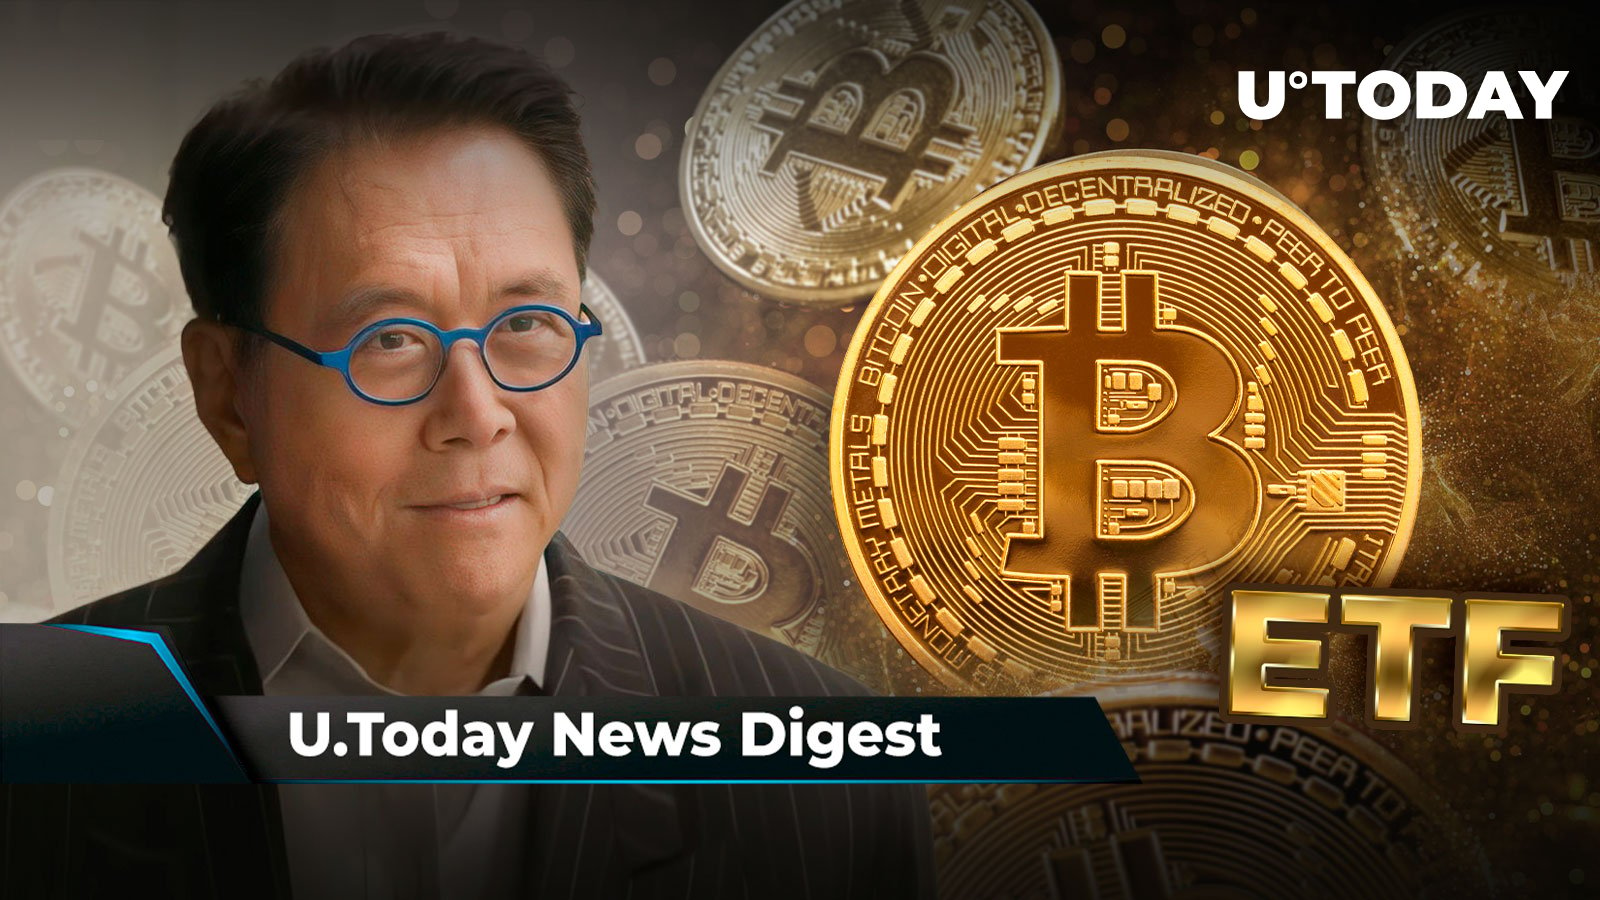 Bitcoin ETFs Eating Gold’s Lunch, ‘Rich Dad Poor Dad’ Author Kiyosaki Explains Why He Owns BTC, Samson Mow Says Bitcoin Price Likely to Go Parabolic: Crypto News Digest by U.Today